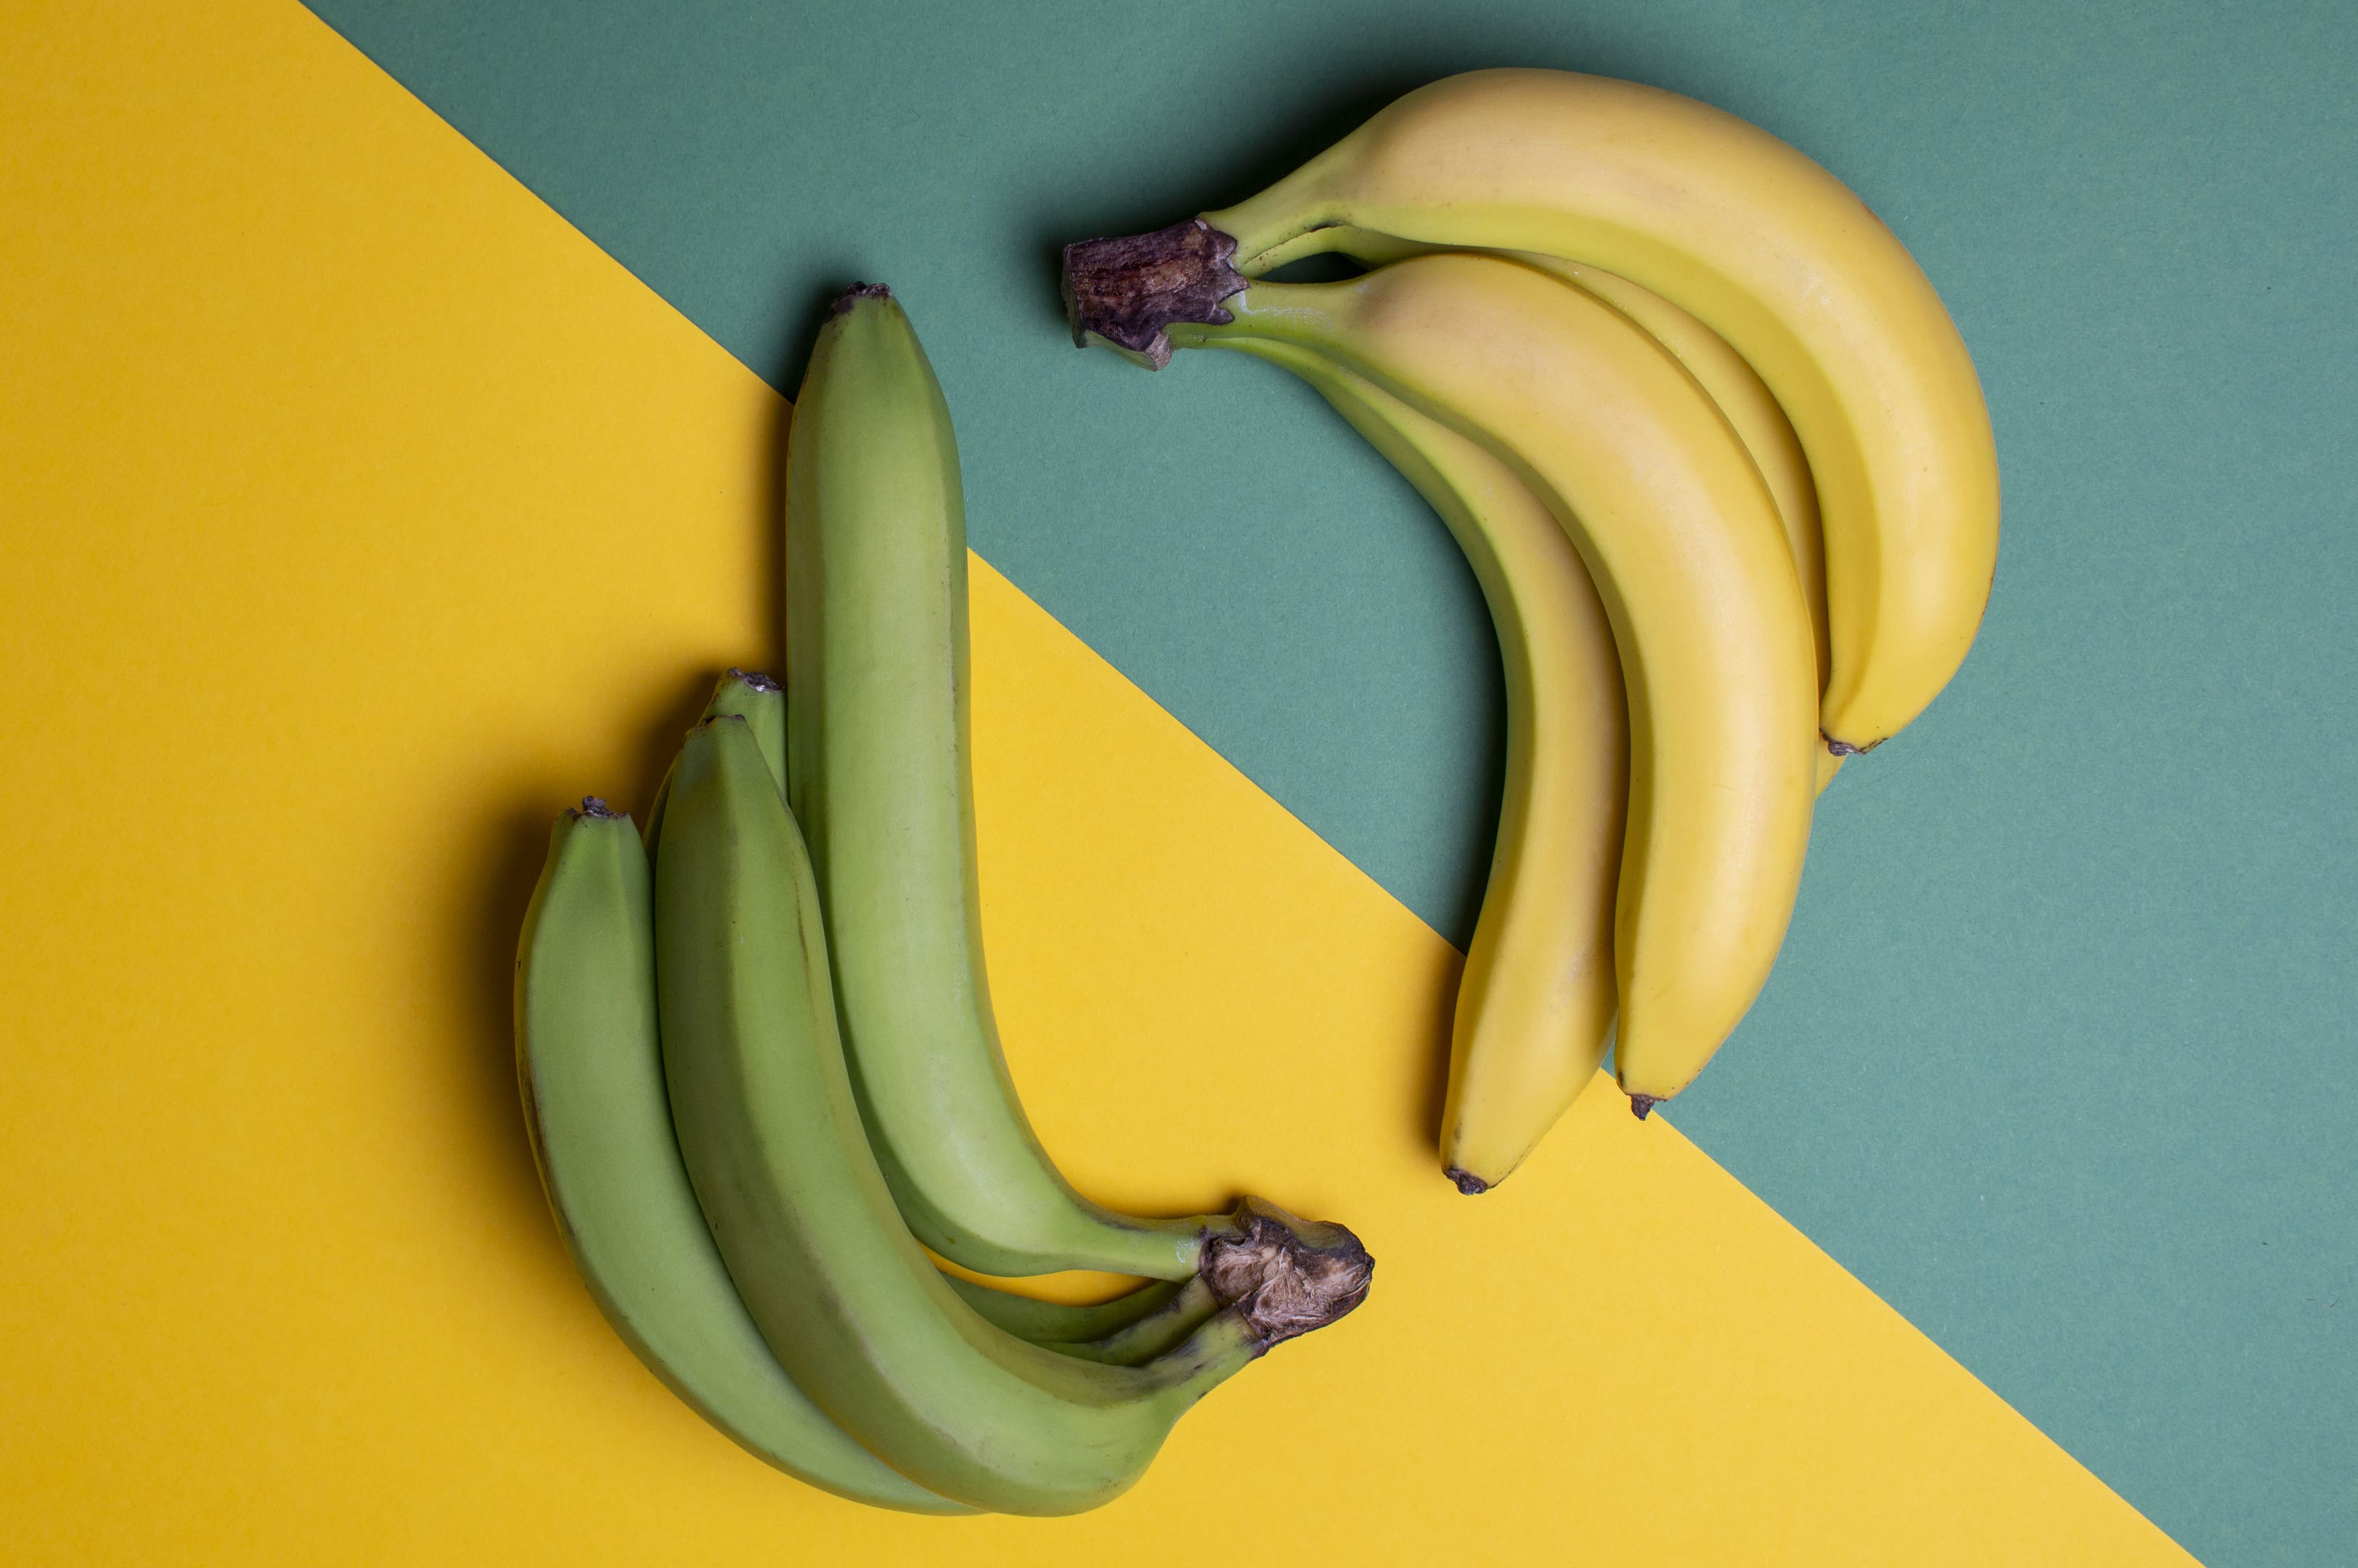 Yellow ripe and green unripe bananas on colored table